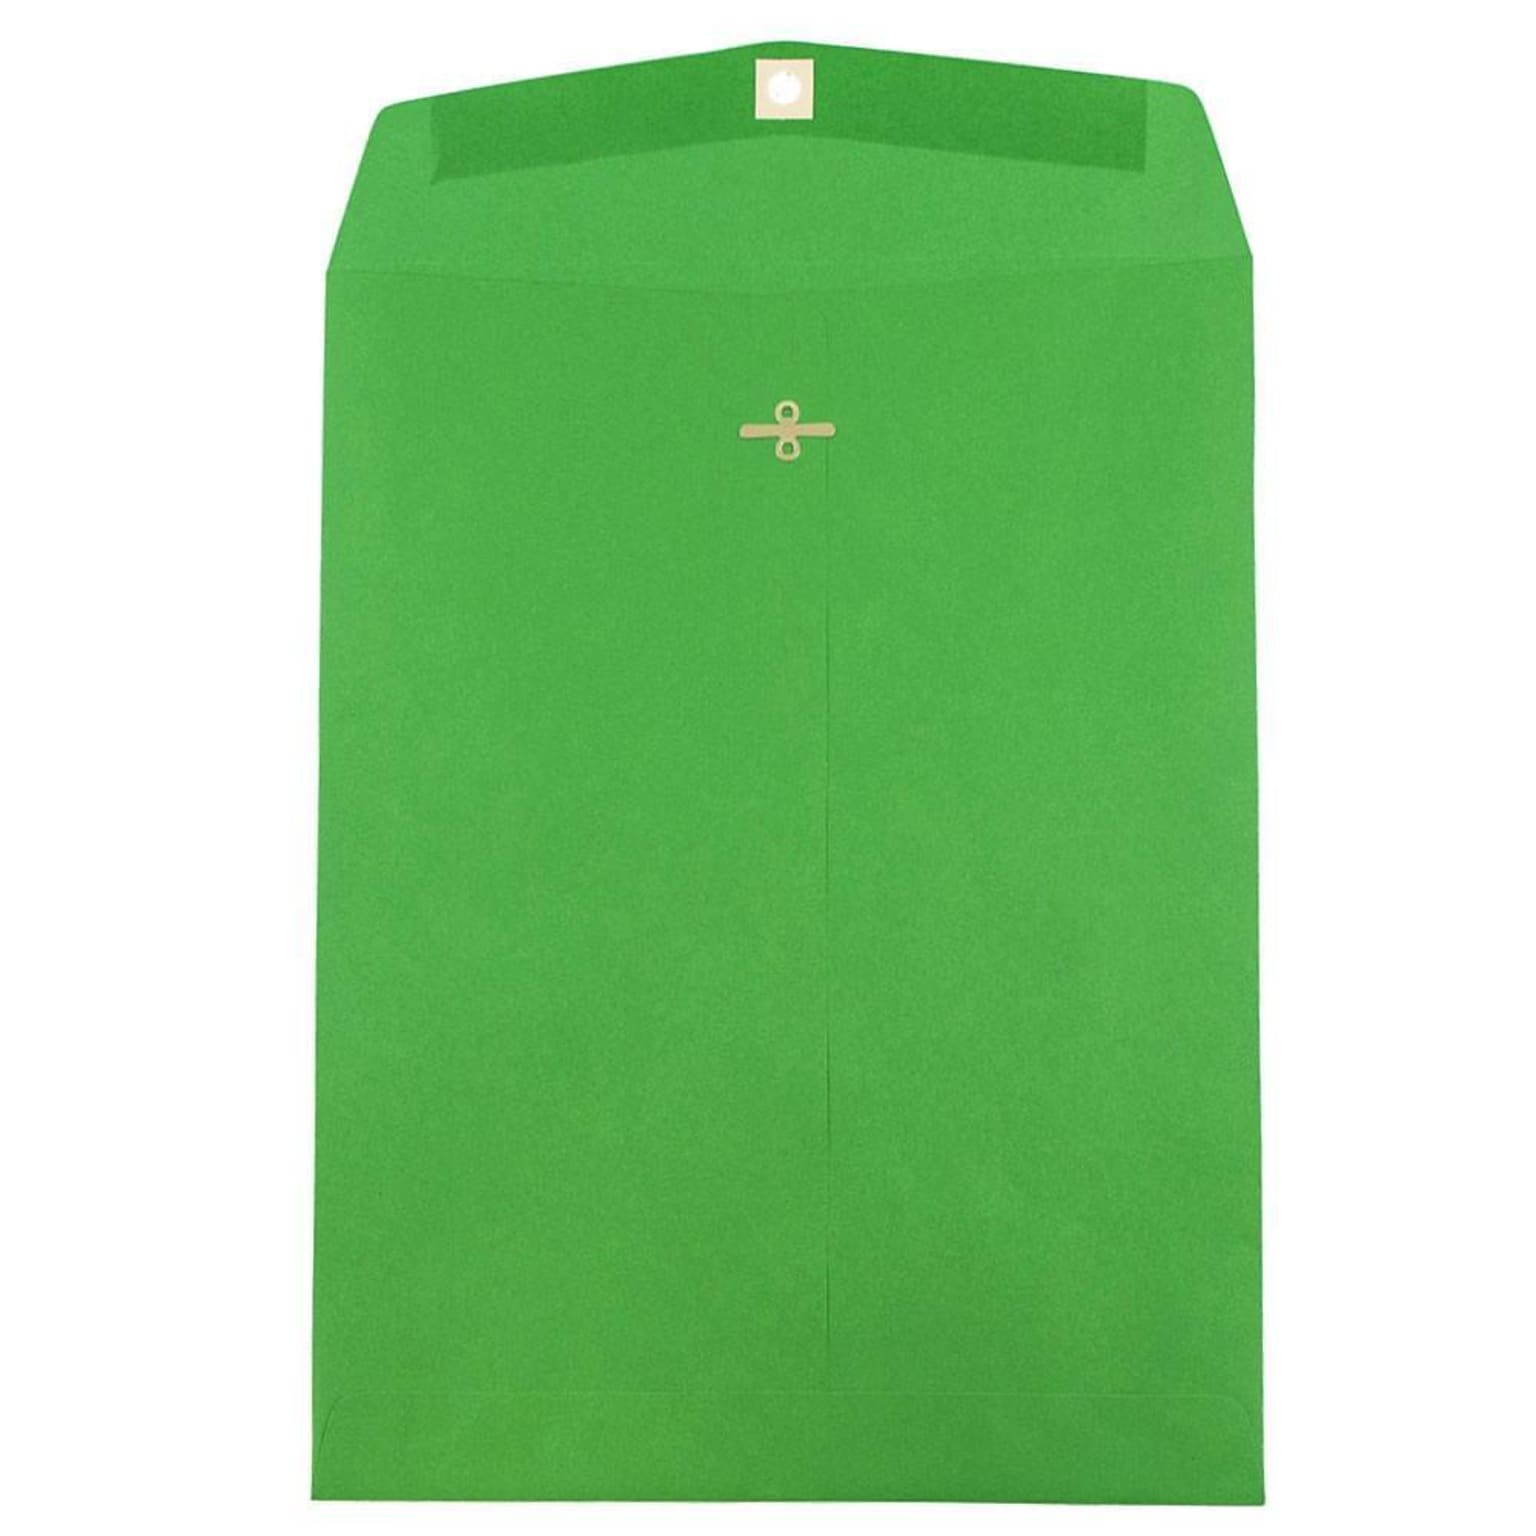 JAM Paper 10 x 13 Open End Catalog Colored Envelopes with Clasp Closure, Green Recycled, 10/Pack (87519B)